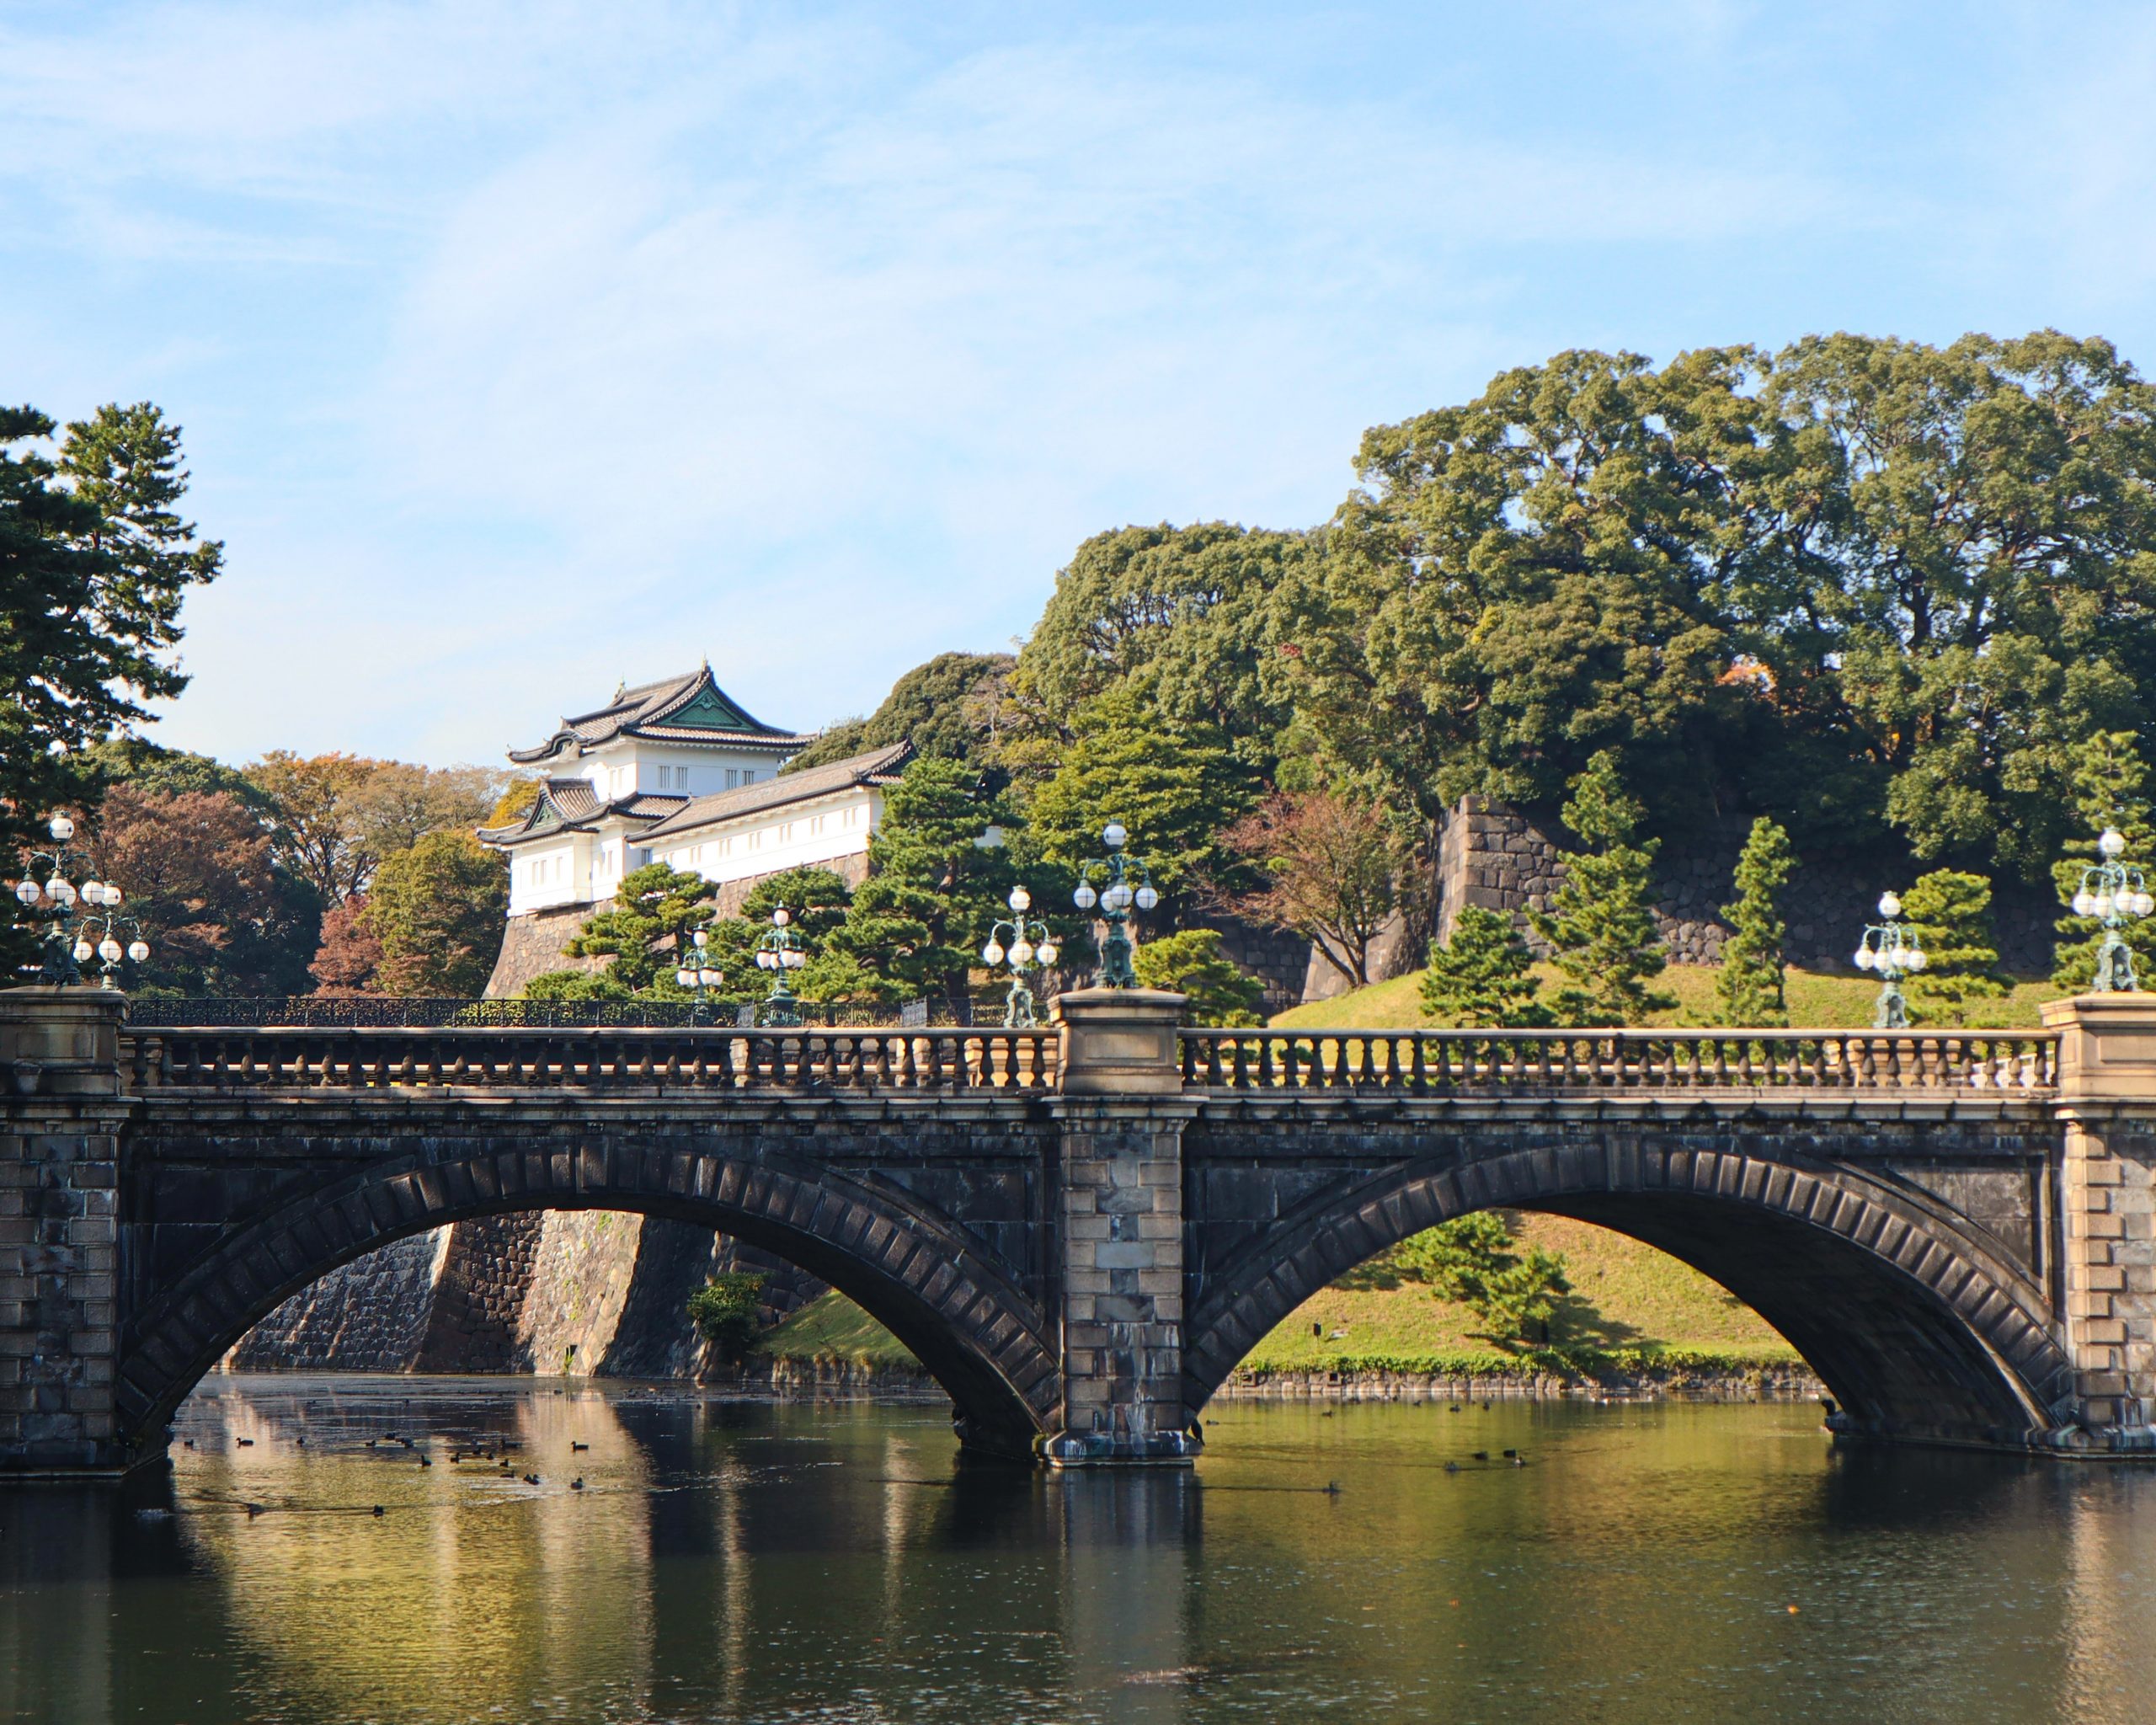 The gardens at the Imperial Palace Tokyo